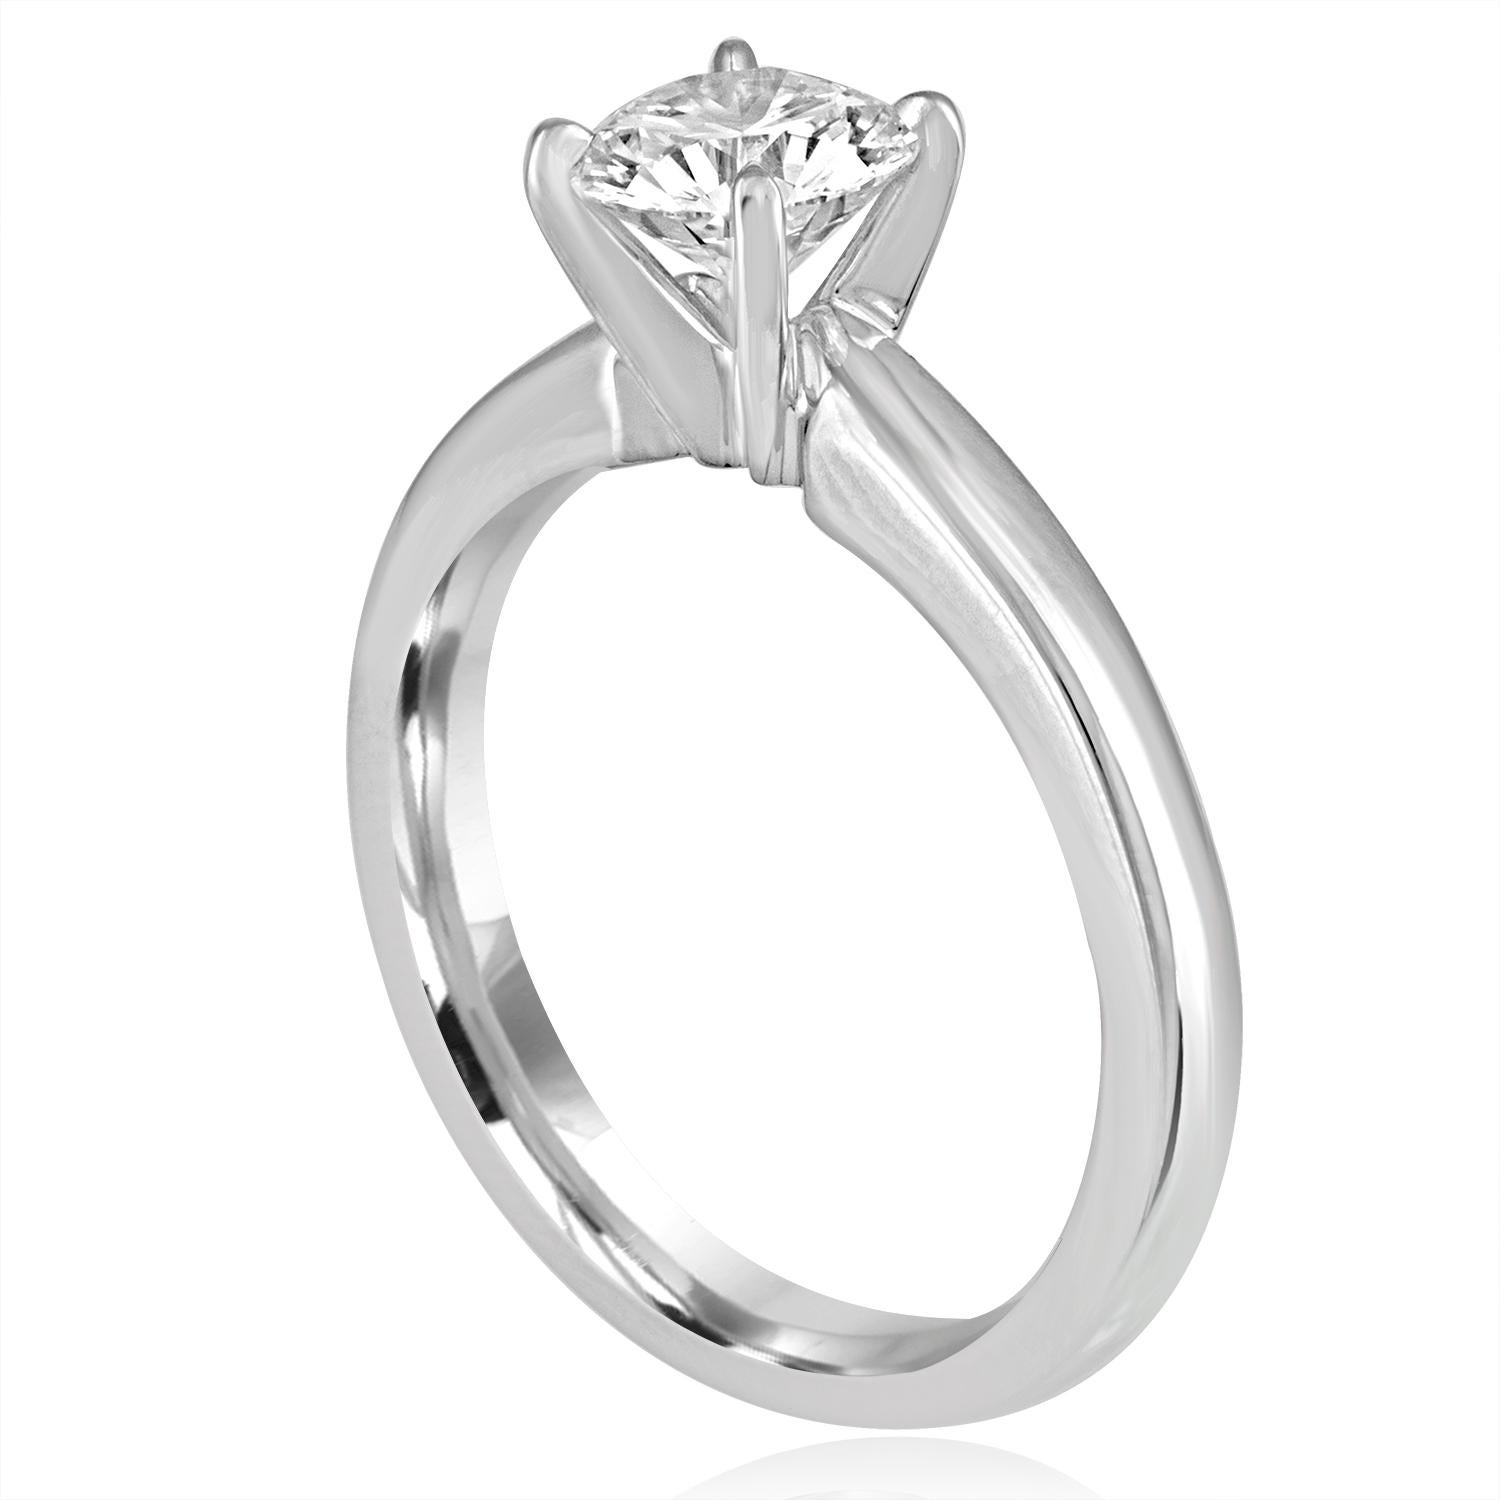 Solitaire Engagement Ring
The ring is Platinum
The center Is Round Cut Stone, GIA Certified 1.03 Carat F VVS2
The ring is a size 7, sizable.
The ring weighs 7.4 grams